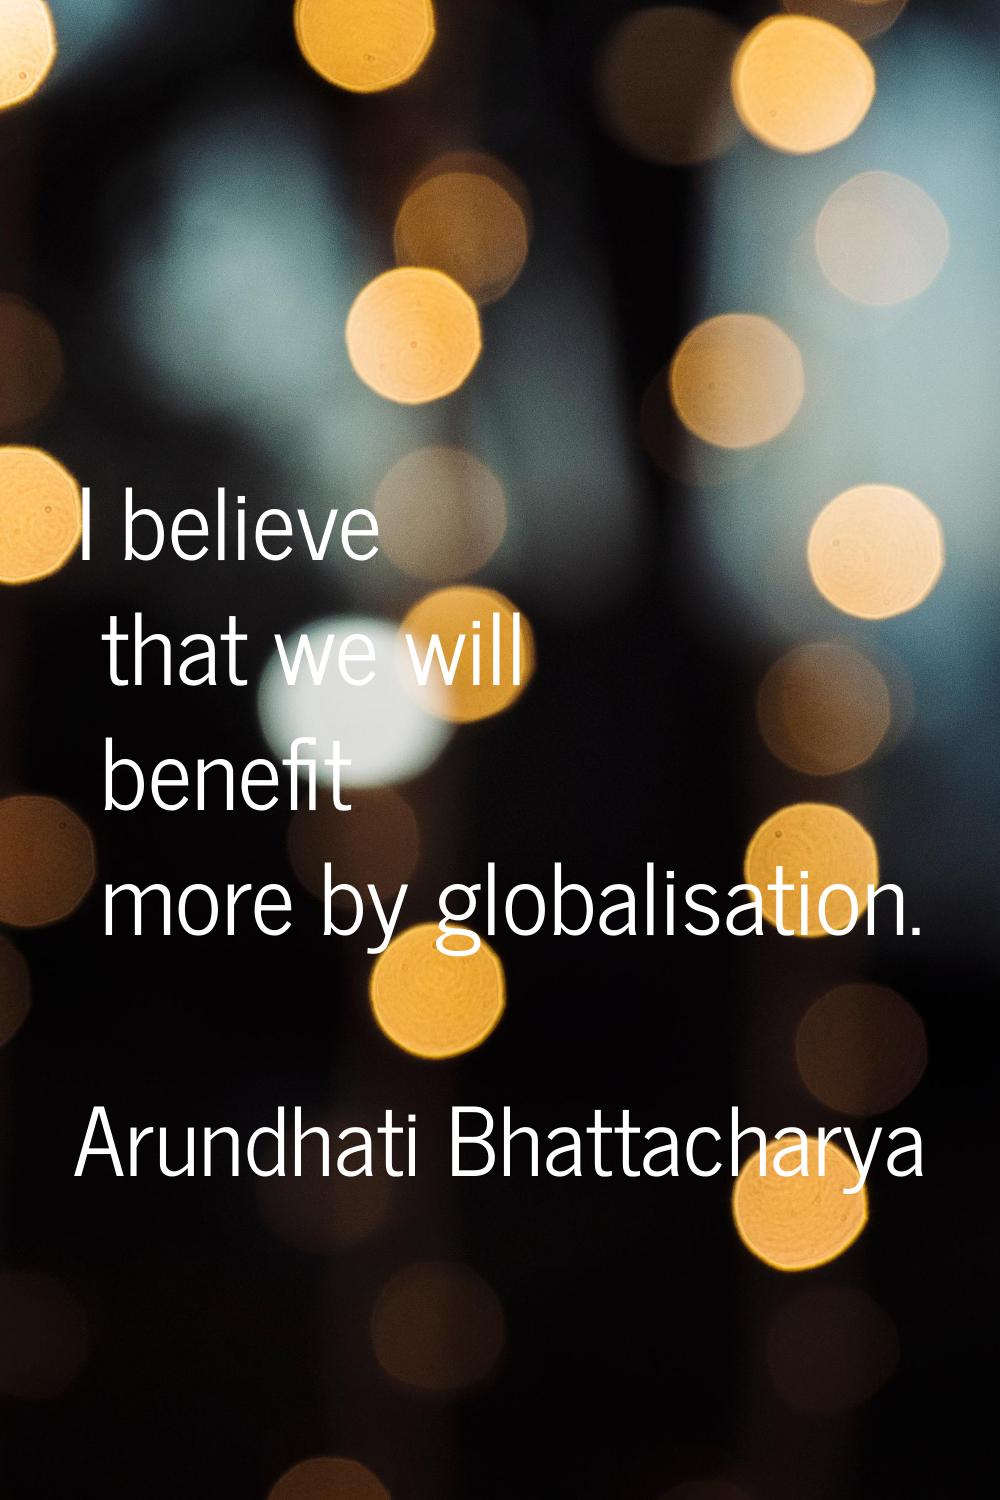 I believe that we will benefit more by globalisation.